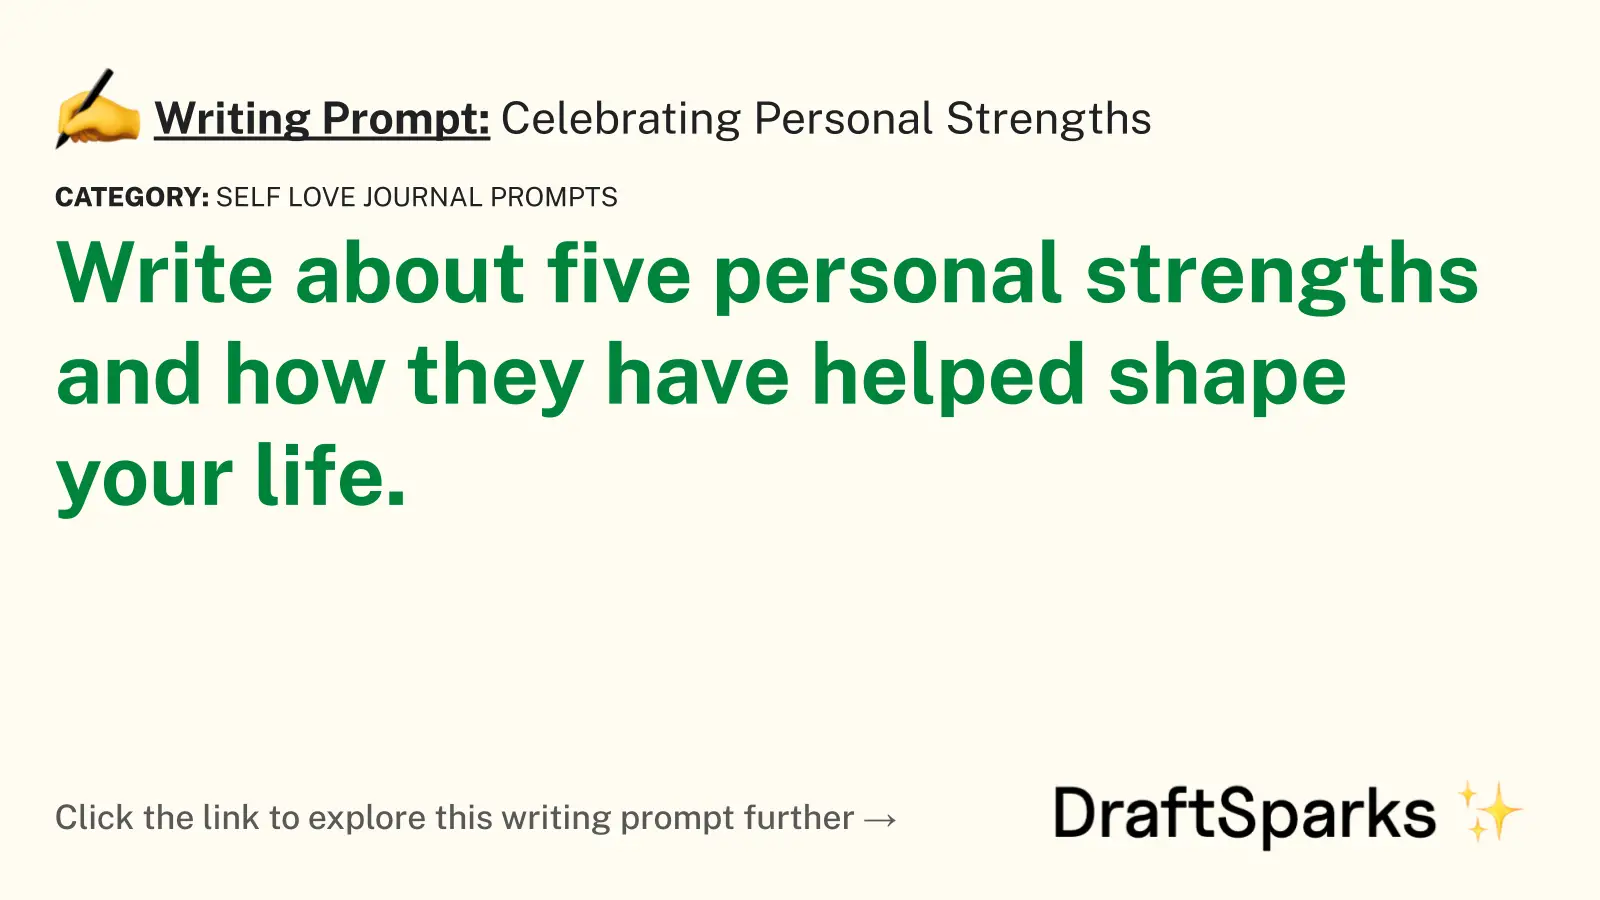 Celebrating Personal Strengths